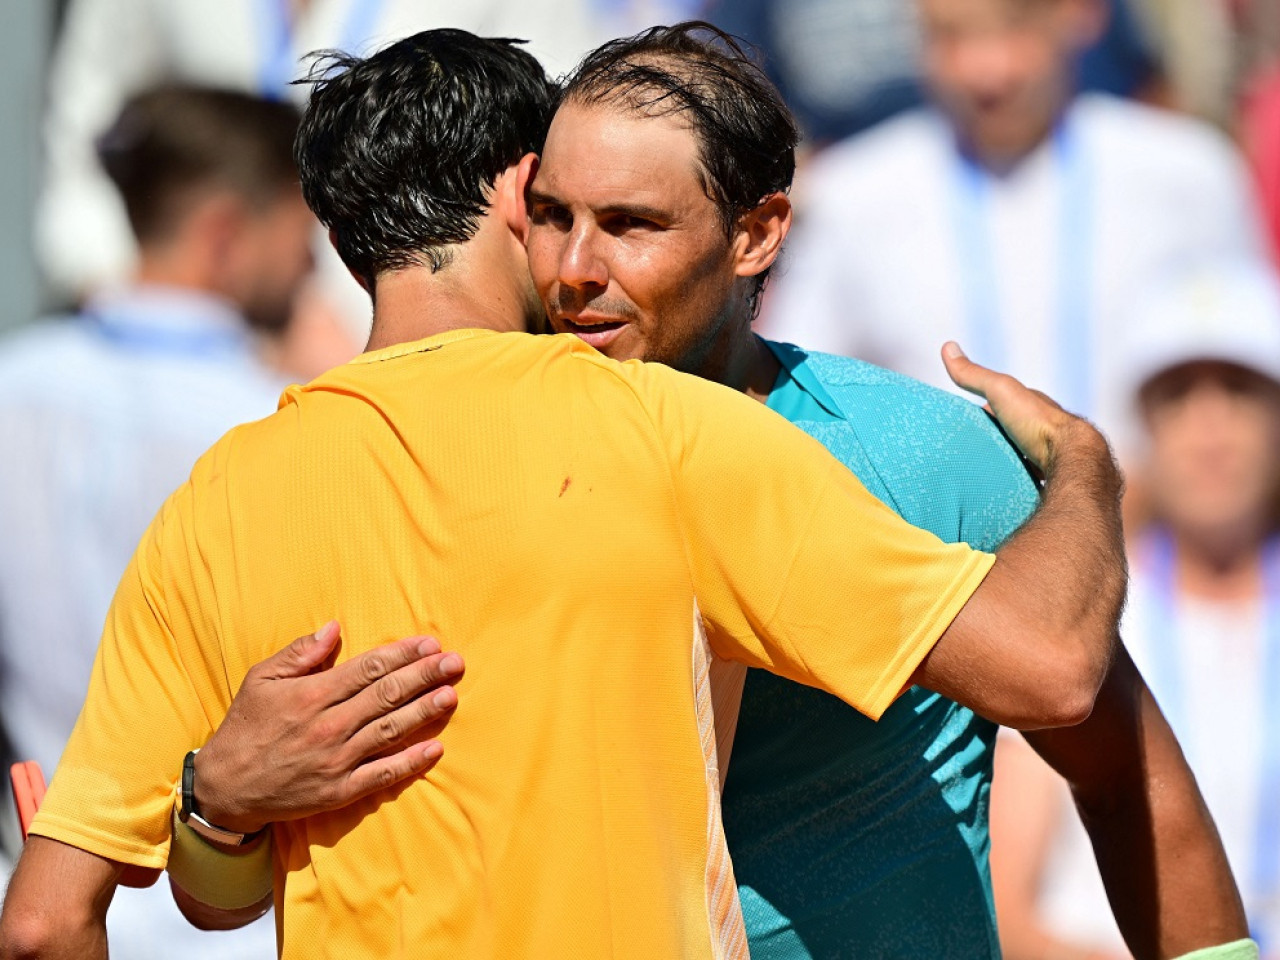 Rafael Nadal was beaten by Portugal's Nuno Borges in the Bastad Open final. REUTERS